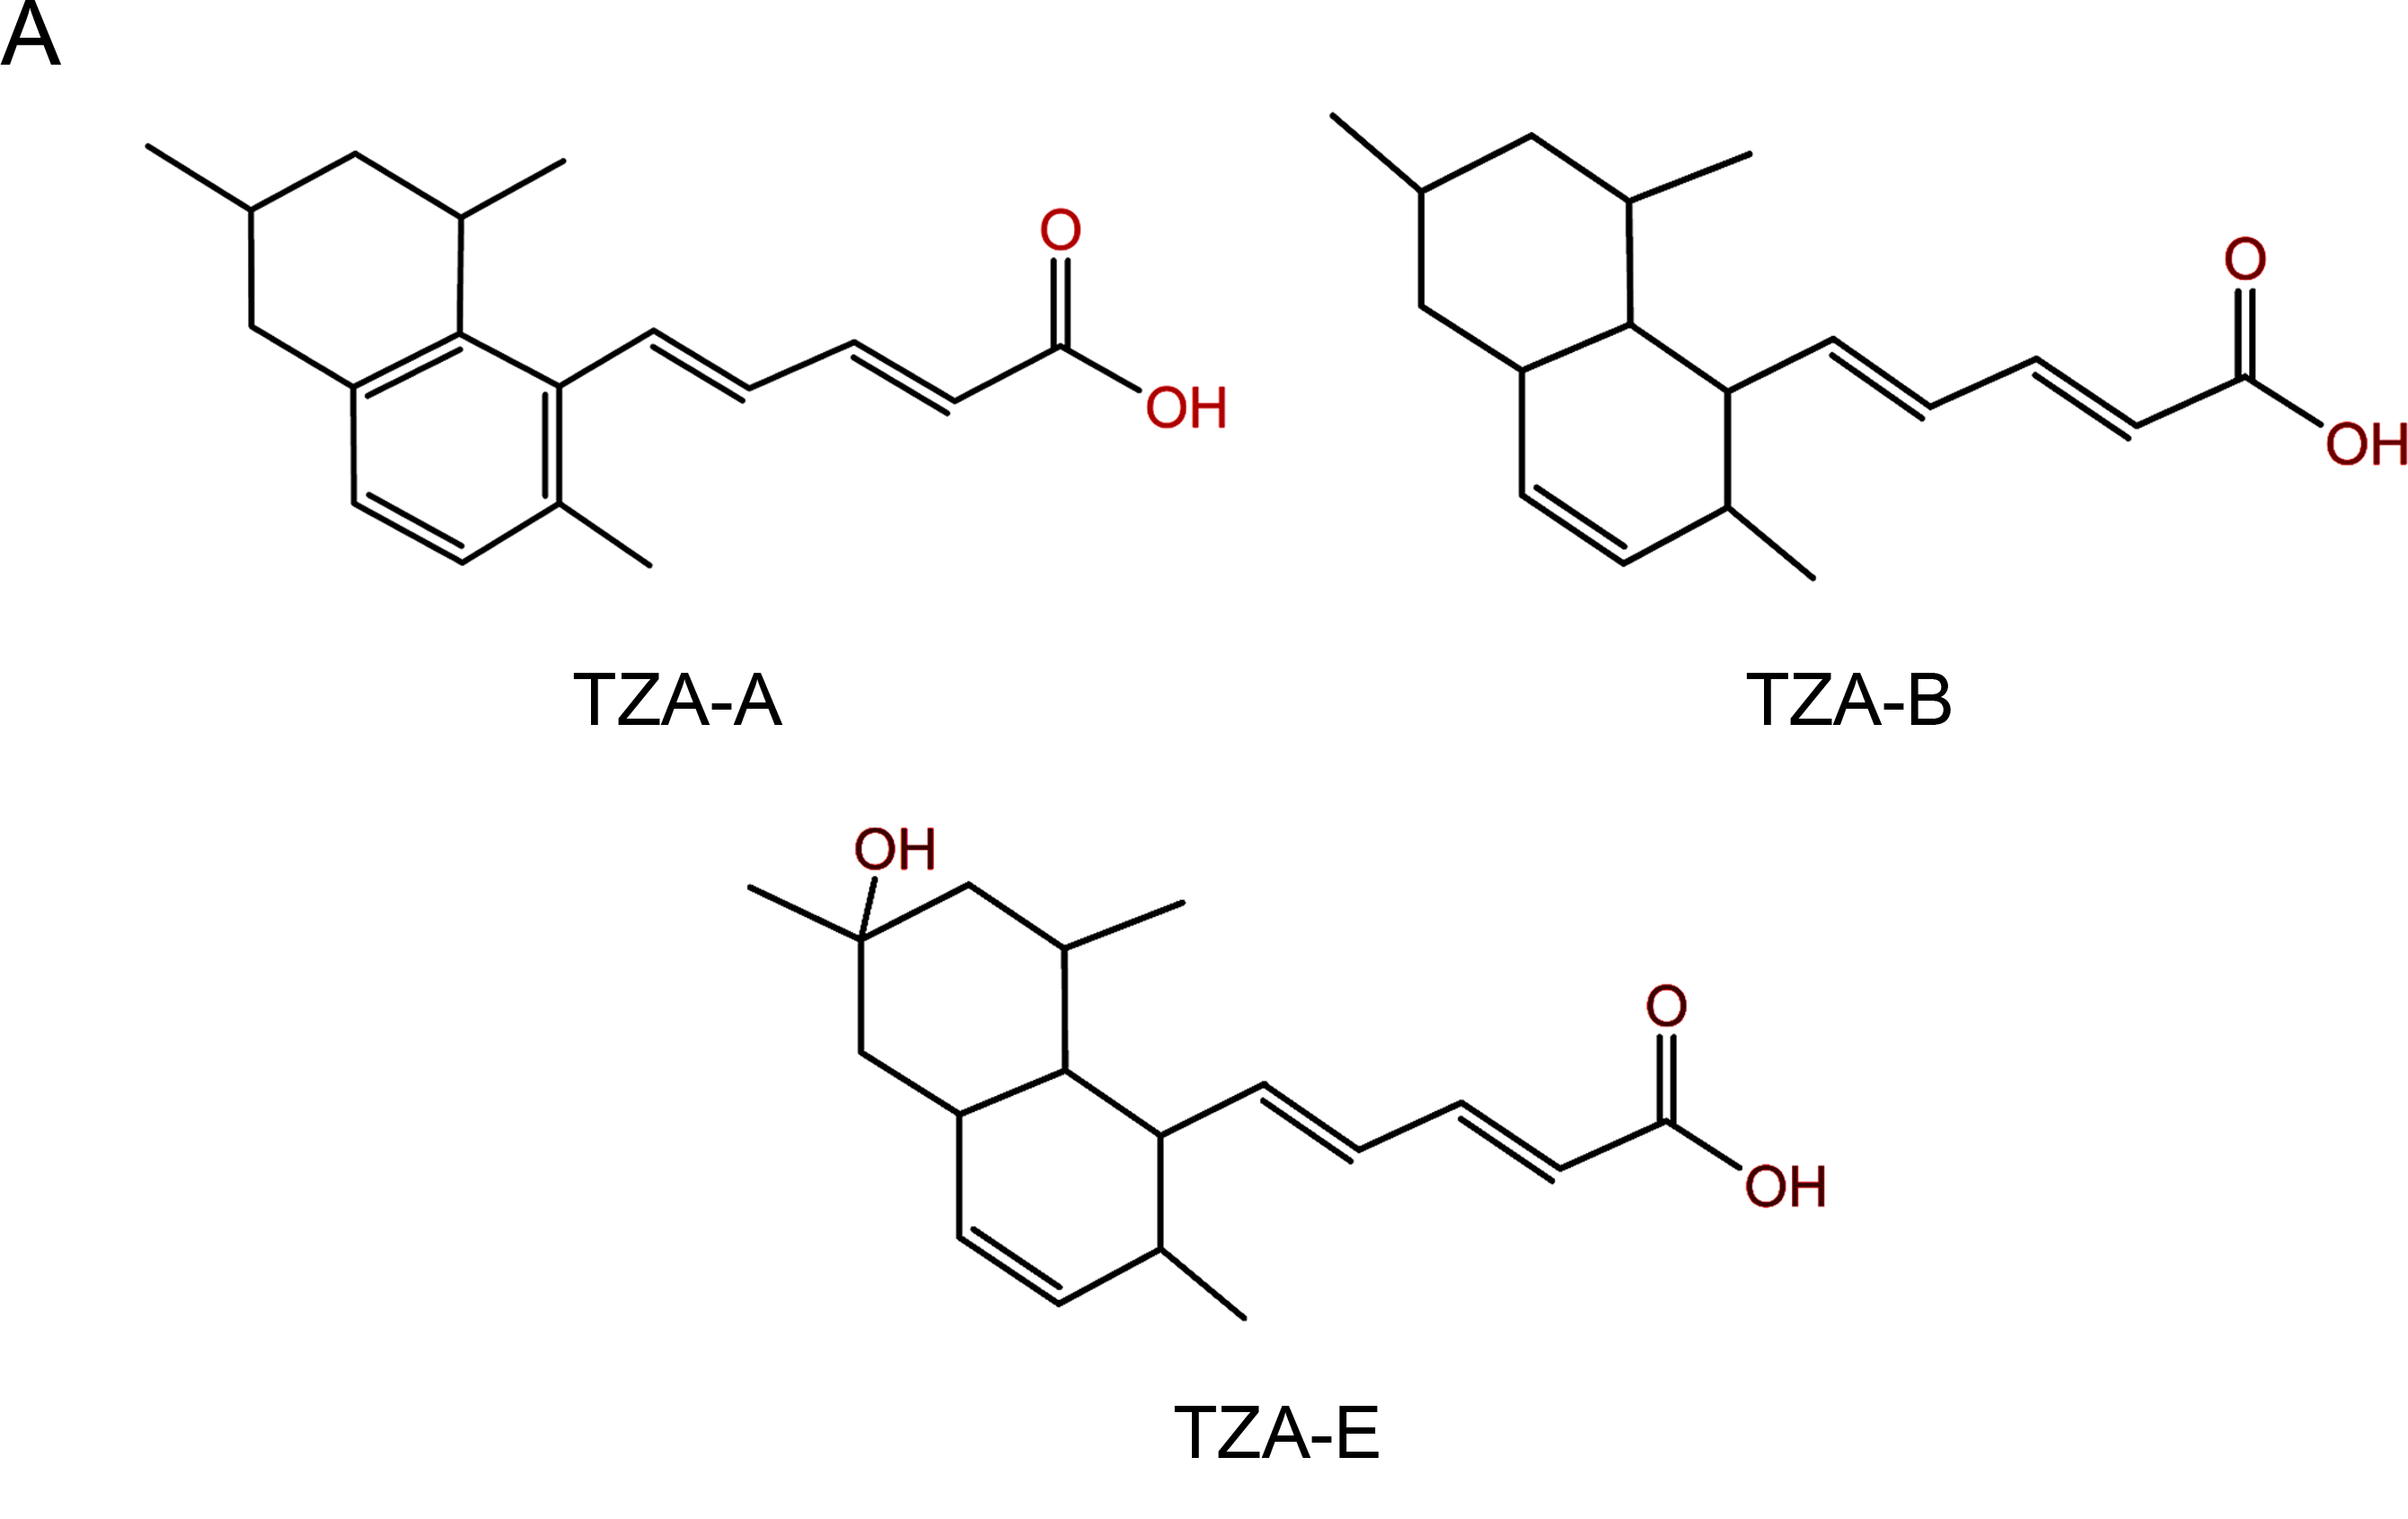 Tanzawaic Acid: A New Weapon In The Fight Against Antibiotic Resistance